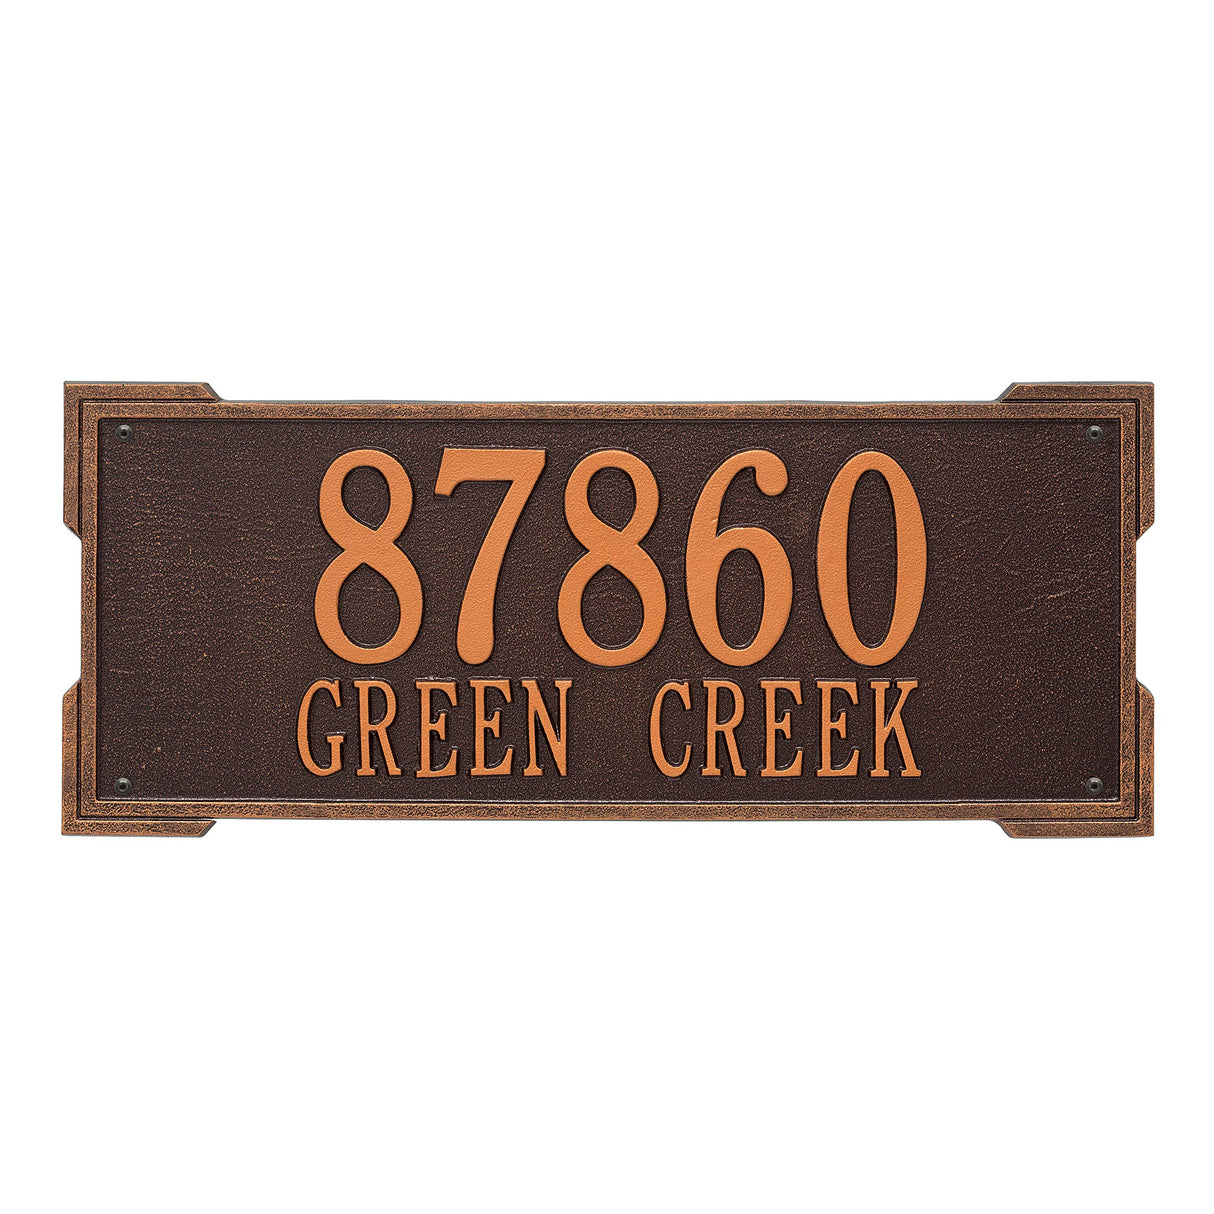 Whitehall 1020AC - Personalized Roanoke Plaque - Estate -Wall - 2 Line